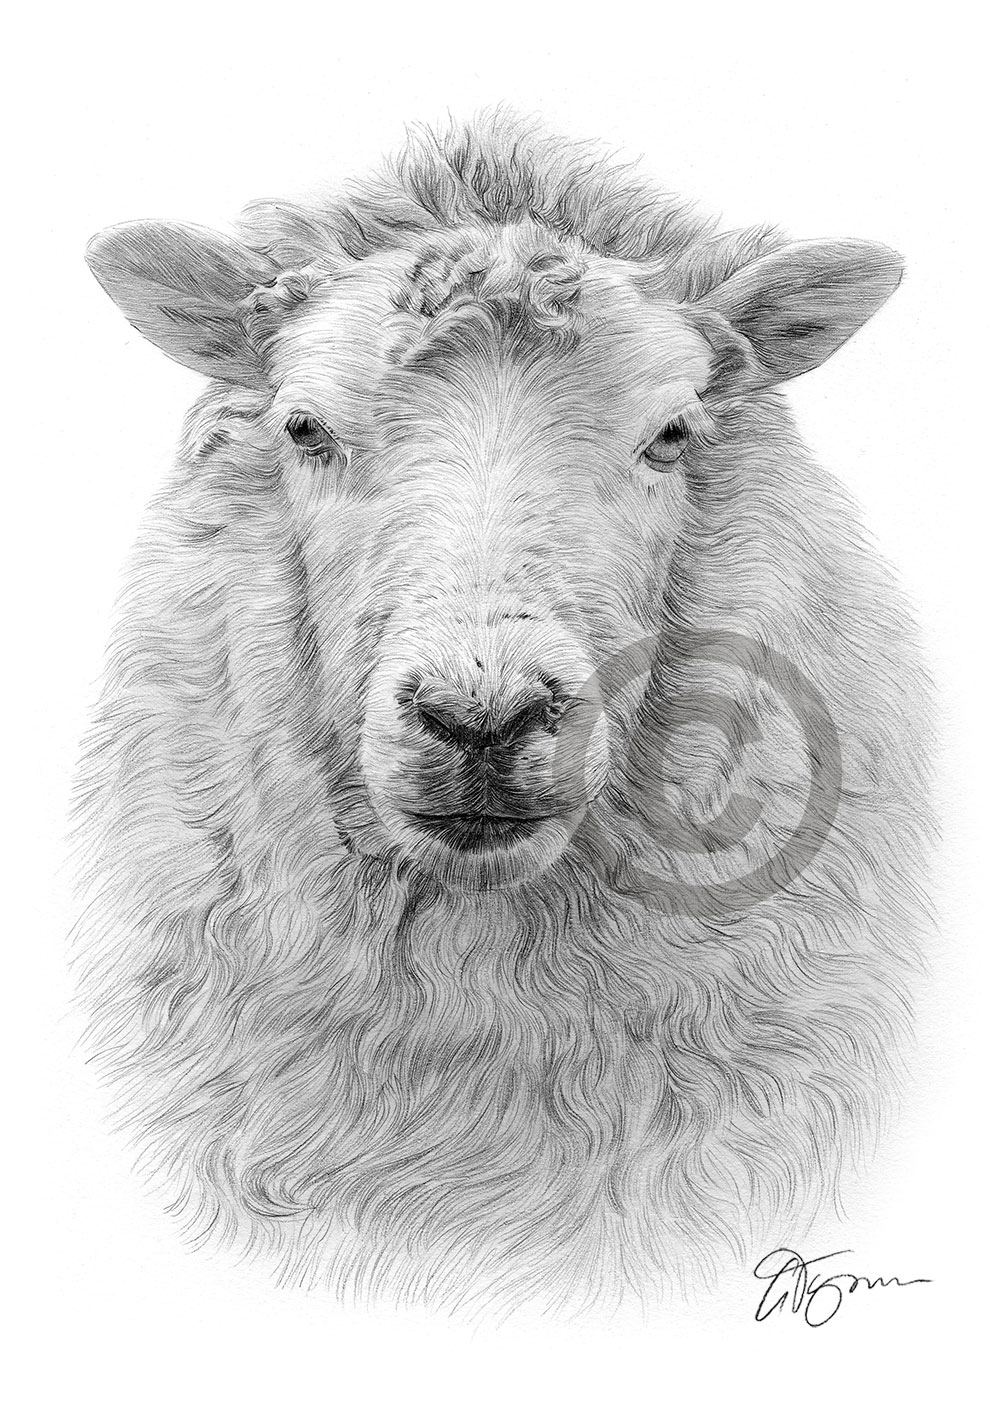 Pencil drawing of a sheep by artist Gary Tymon